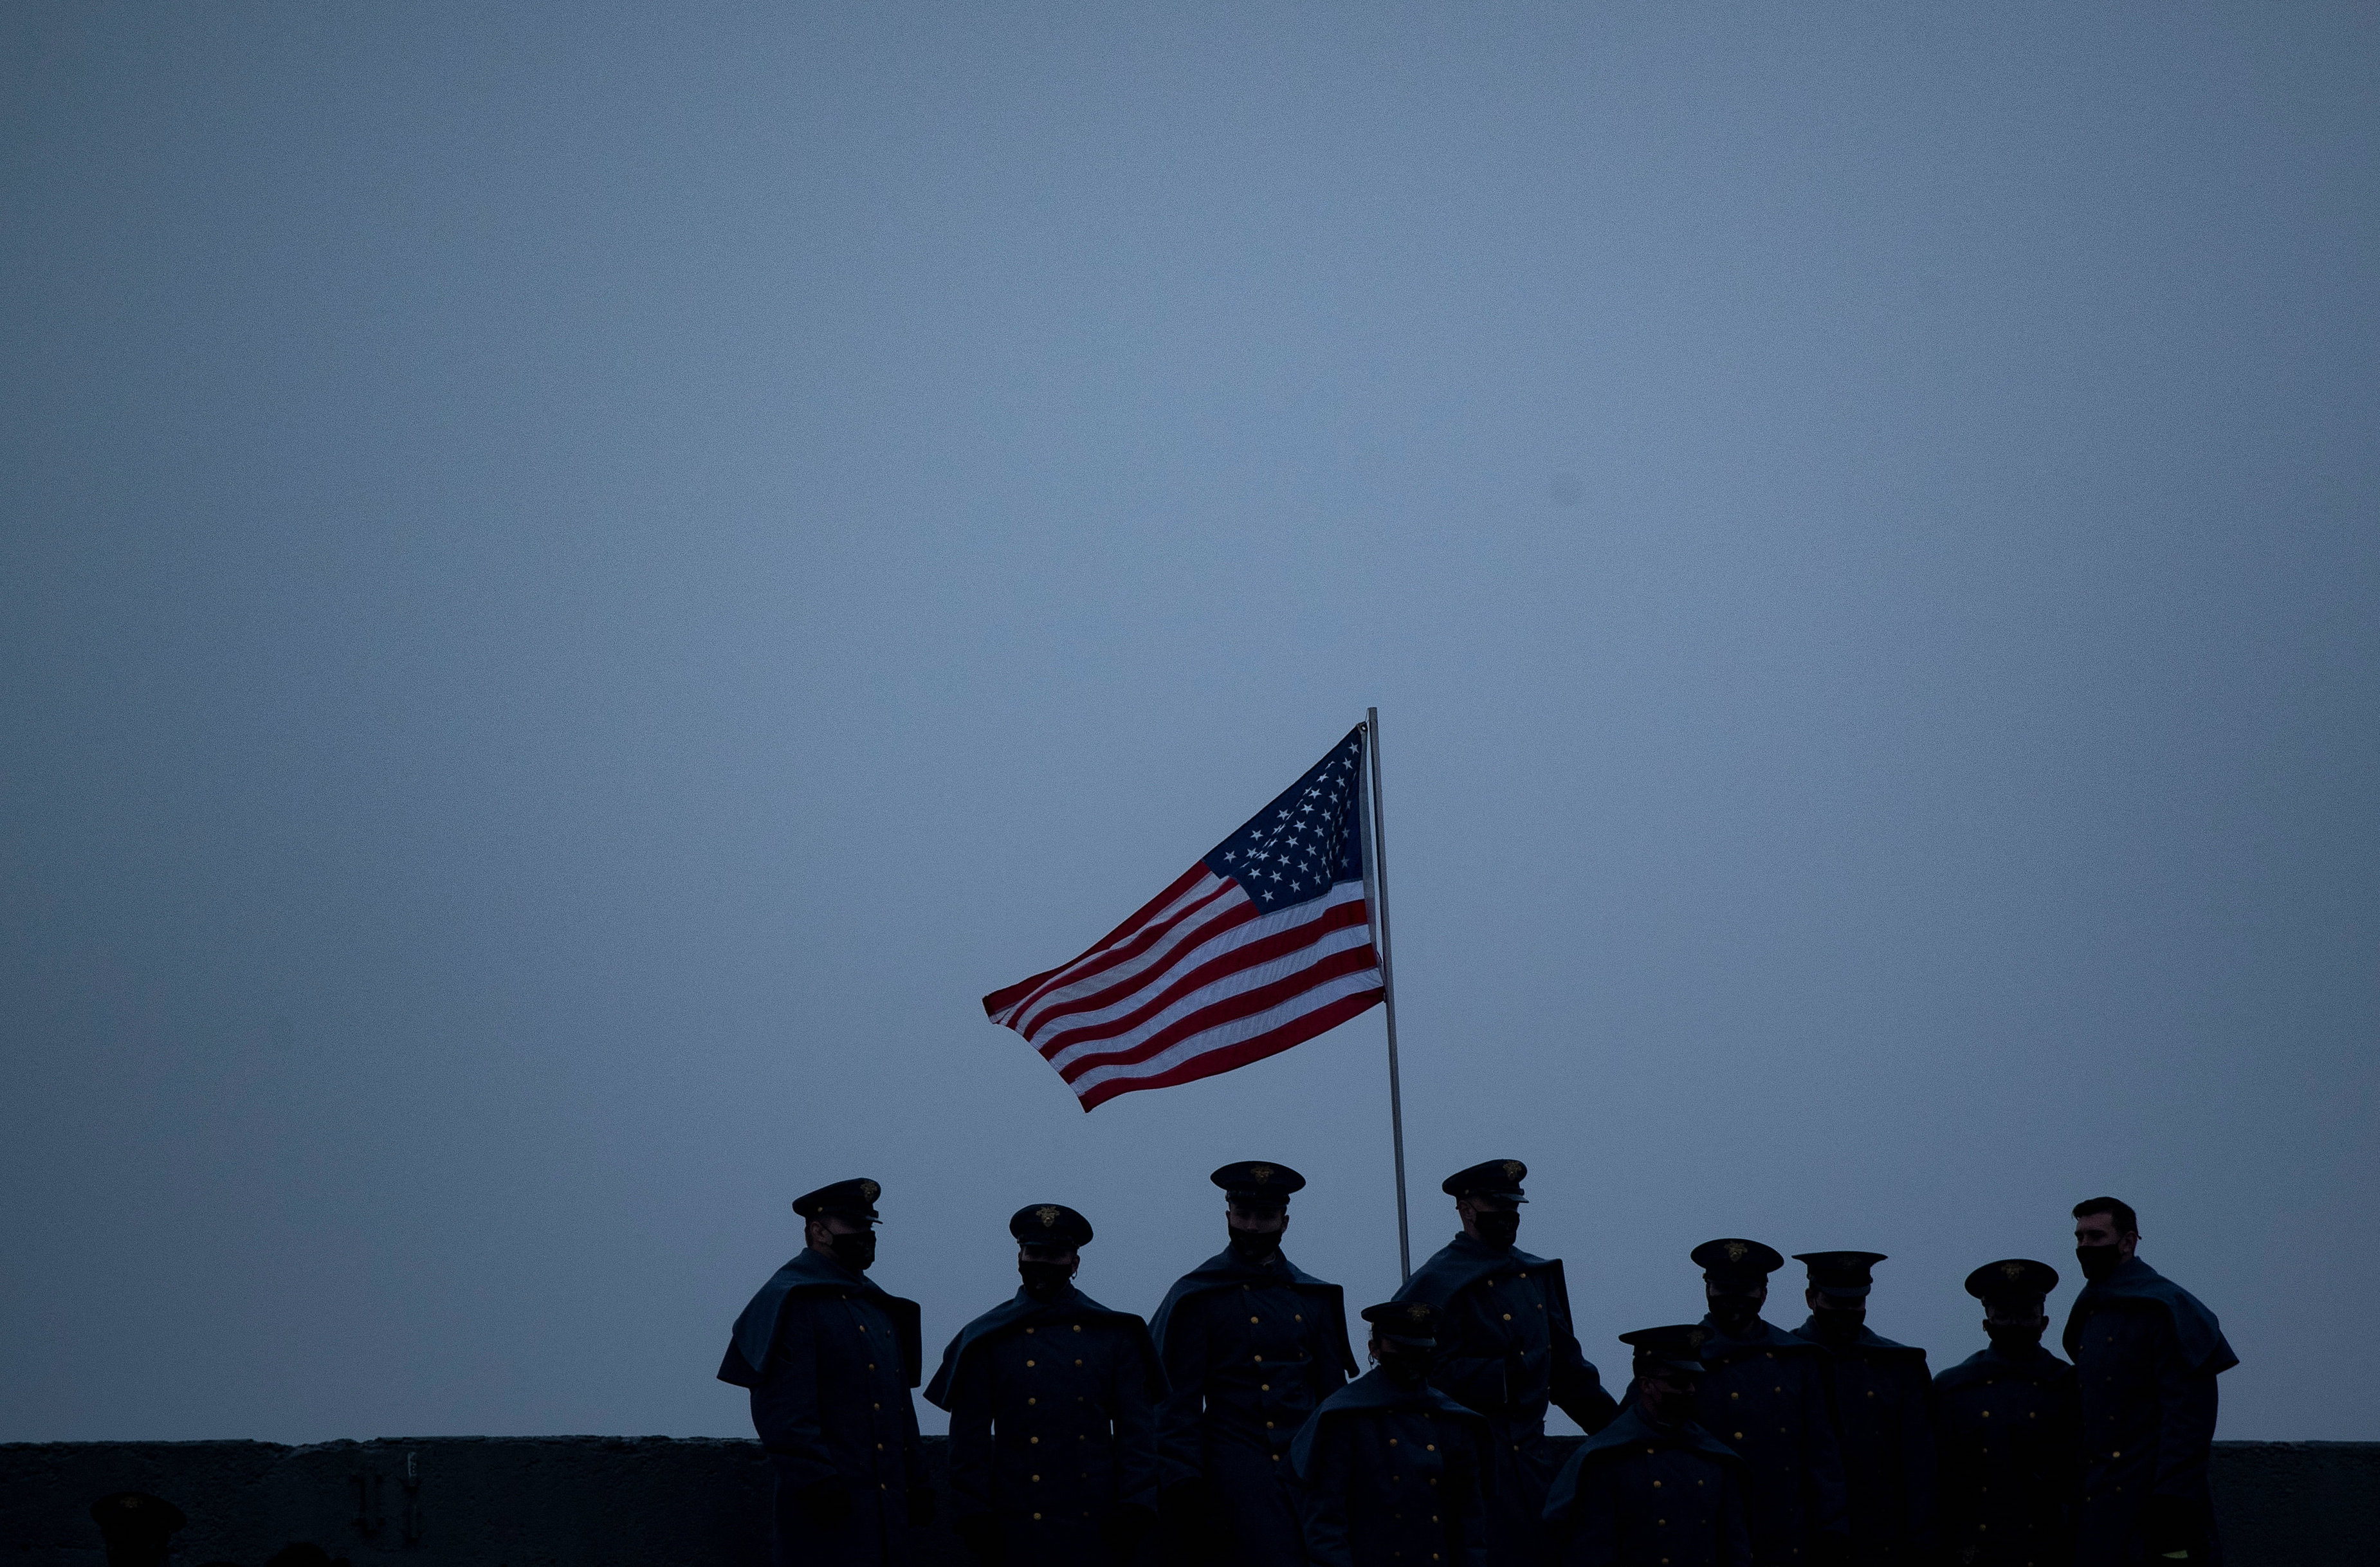 Members of the military stand near the US National flag during the Army-Navy football game at Michie Stadium on 12 December, 2020 (AFP)